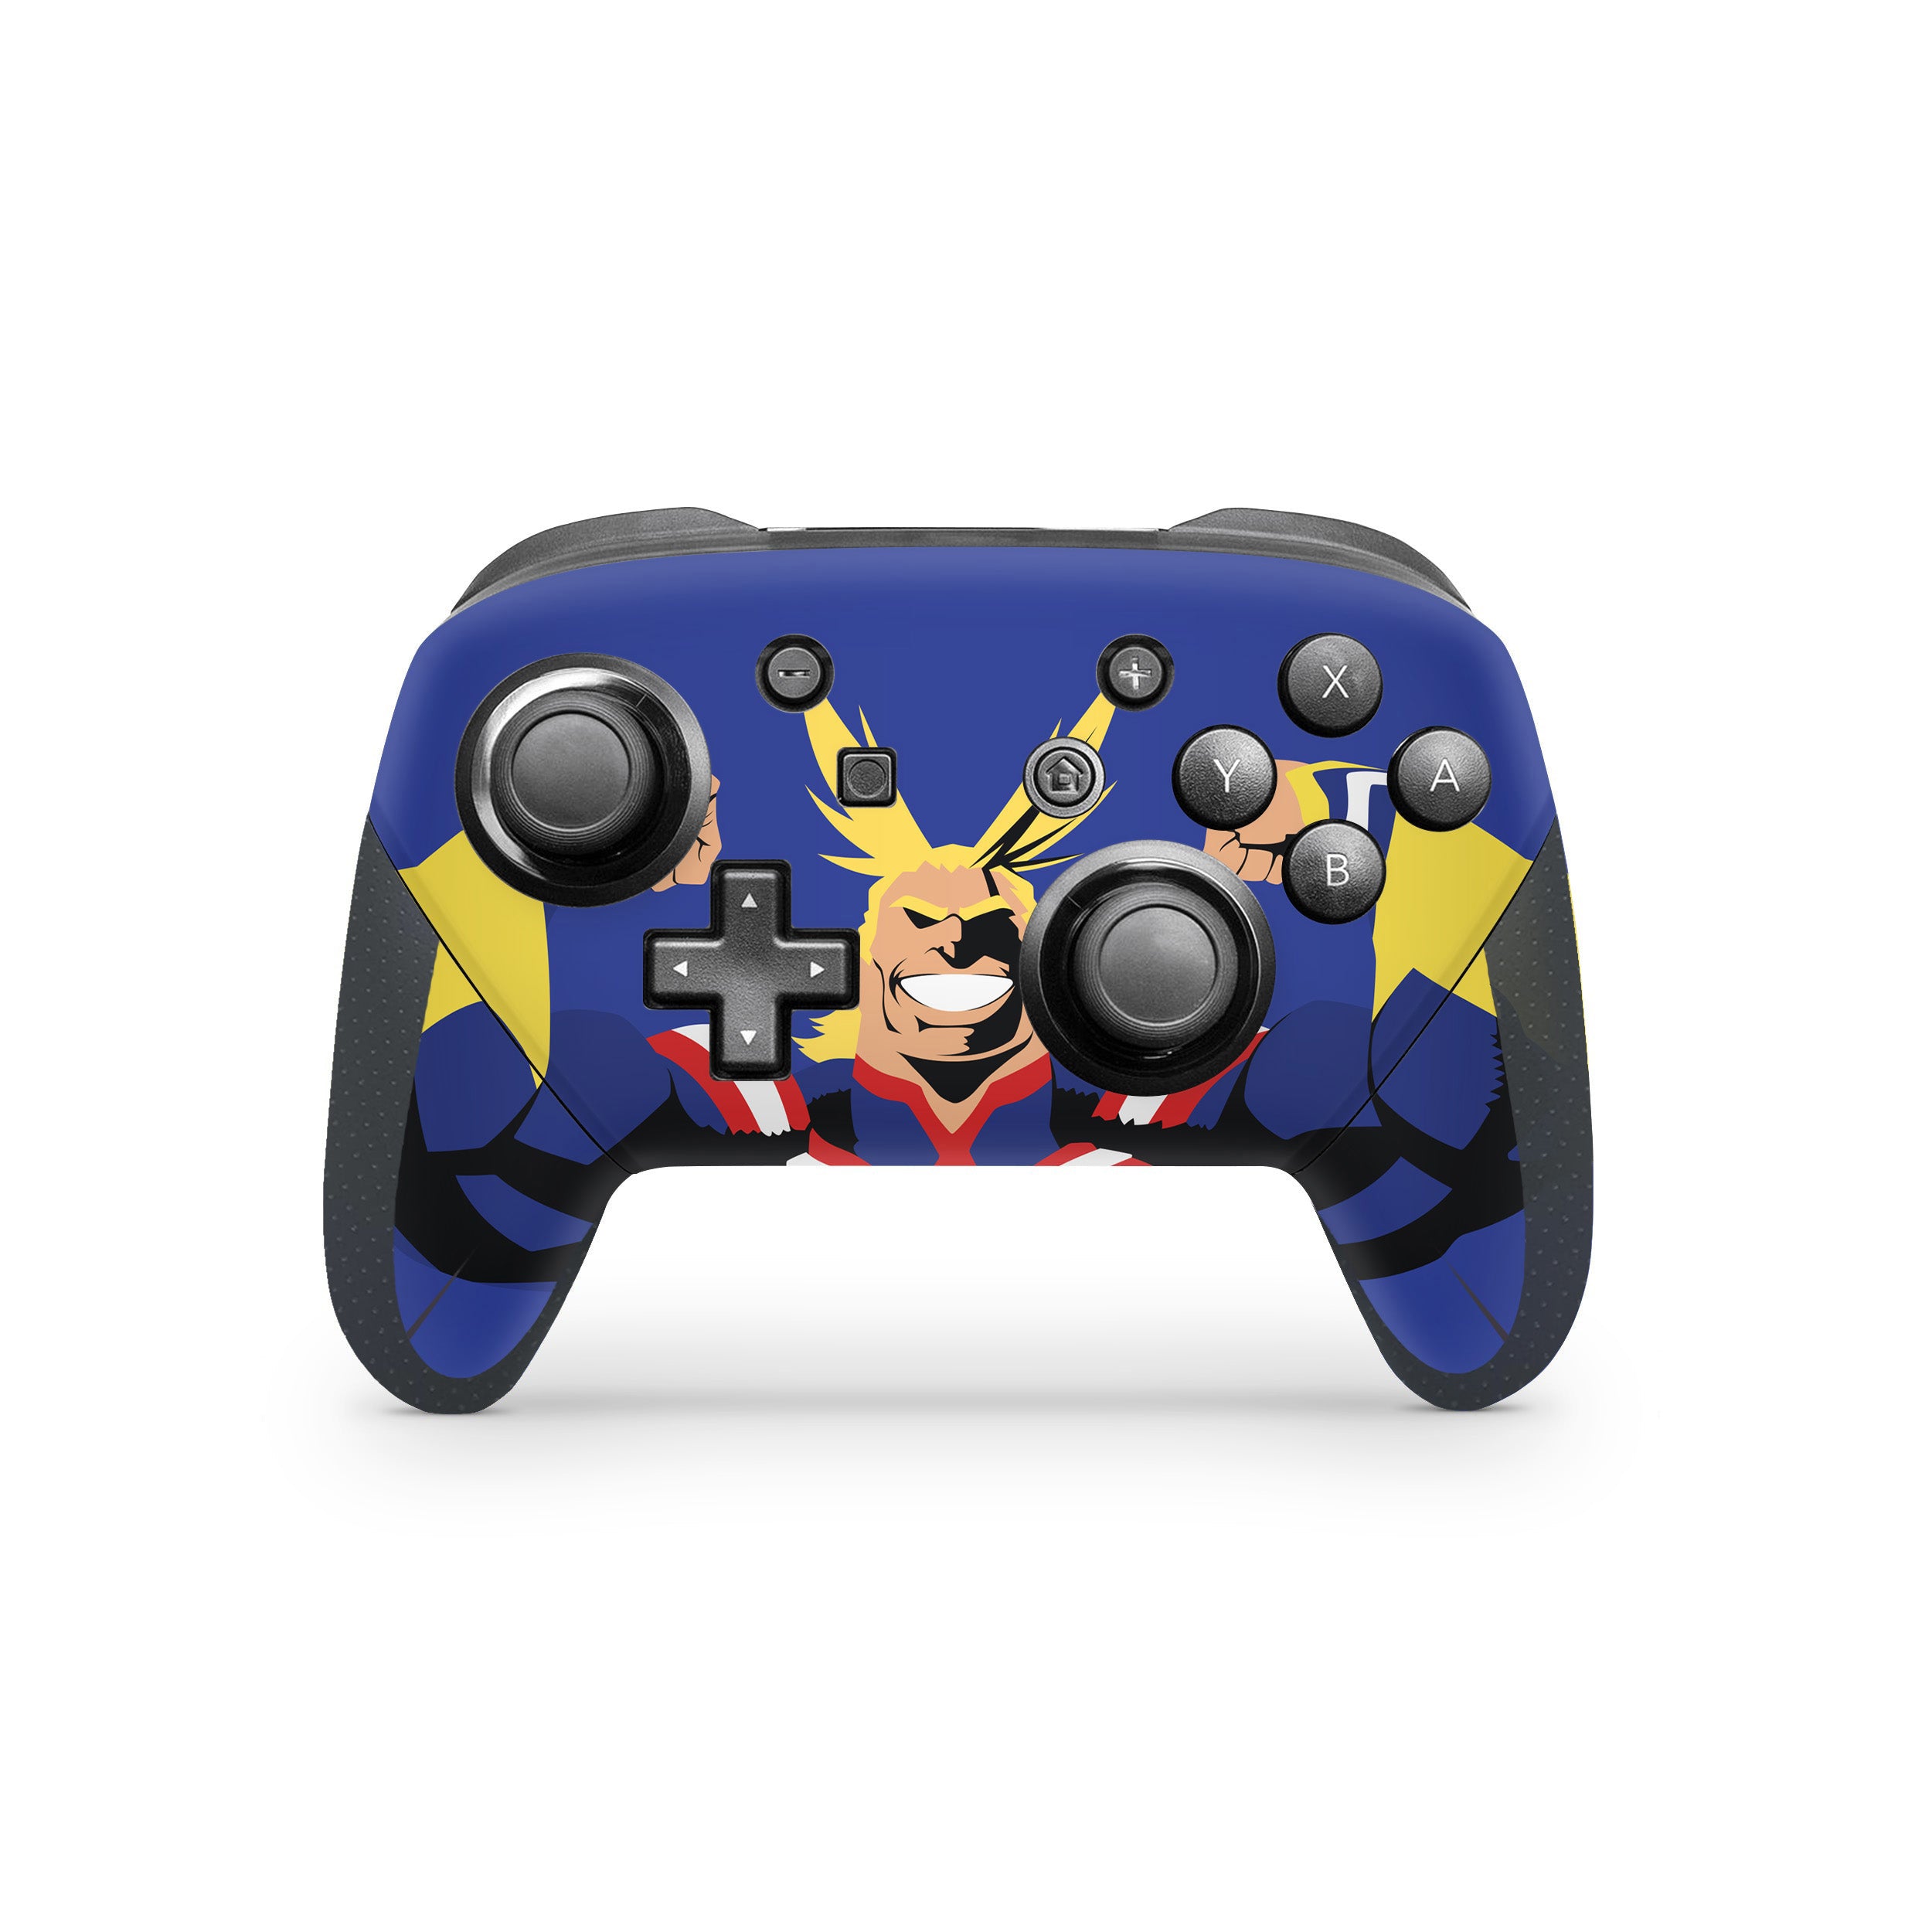 A video game skin featuring a My Hero Academia All Might design for the Switch Pro Controller.